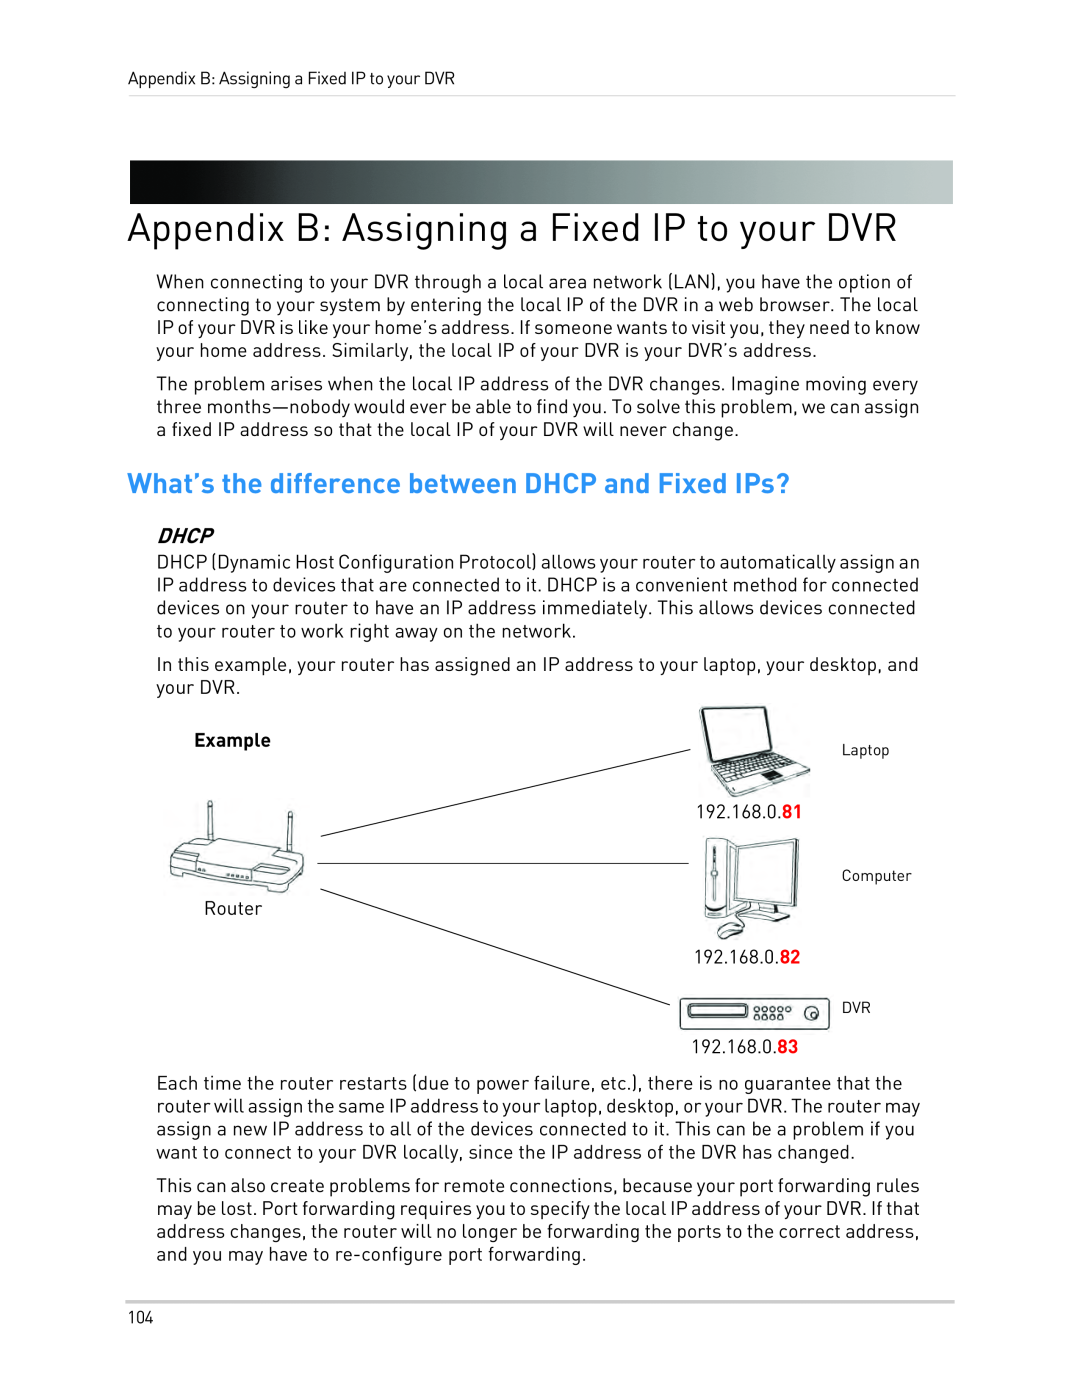 LOREX Technology LH330 EDGE2, LH340 EDGE3, LH3481001C8B Appendix B: Assigning a Fixed IP to your DVR, Dhcp, Example 